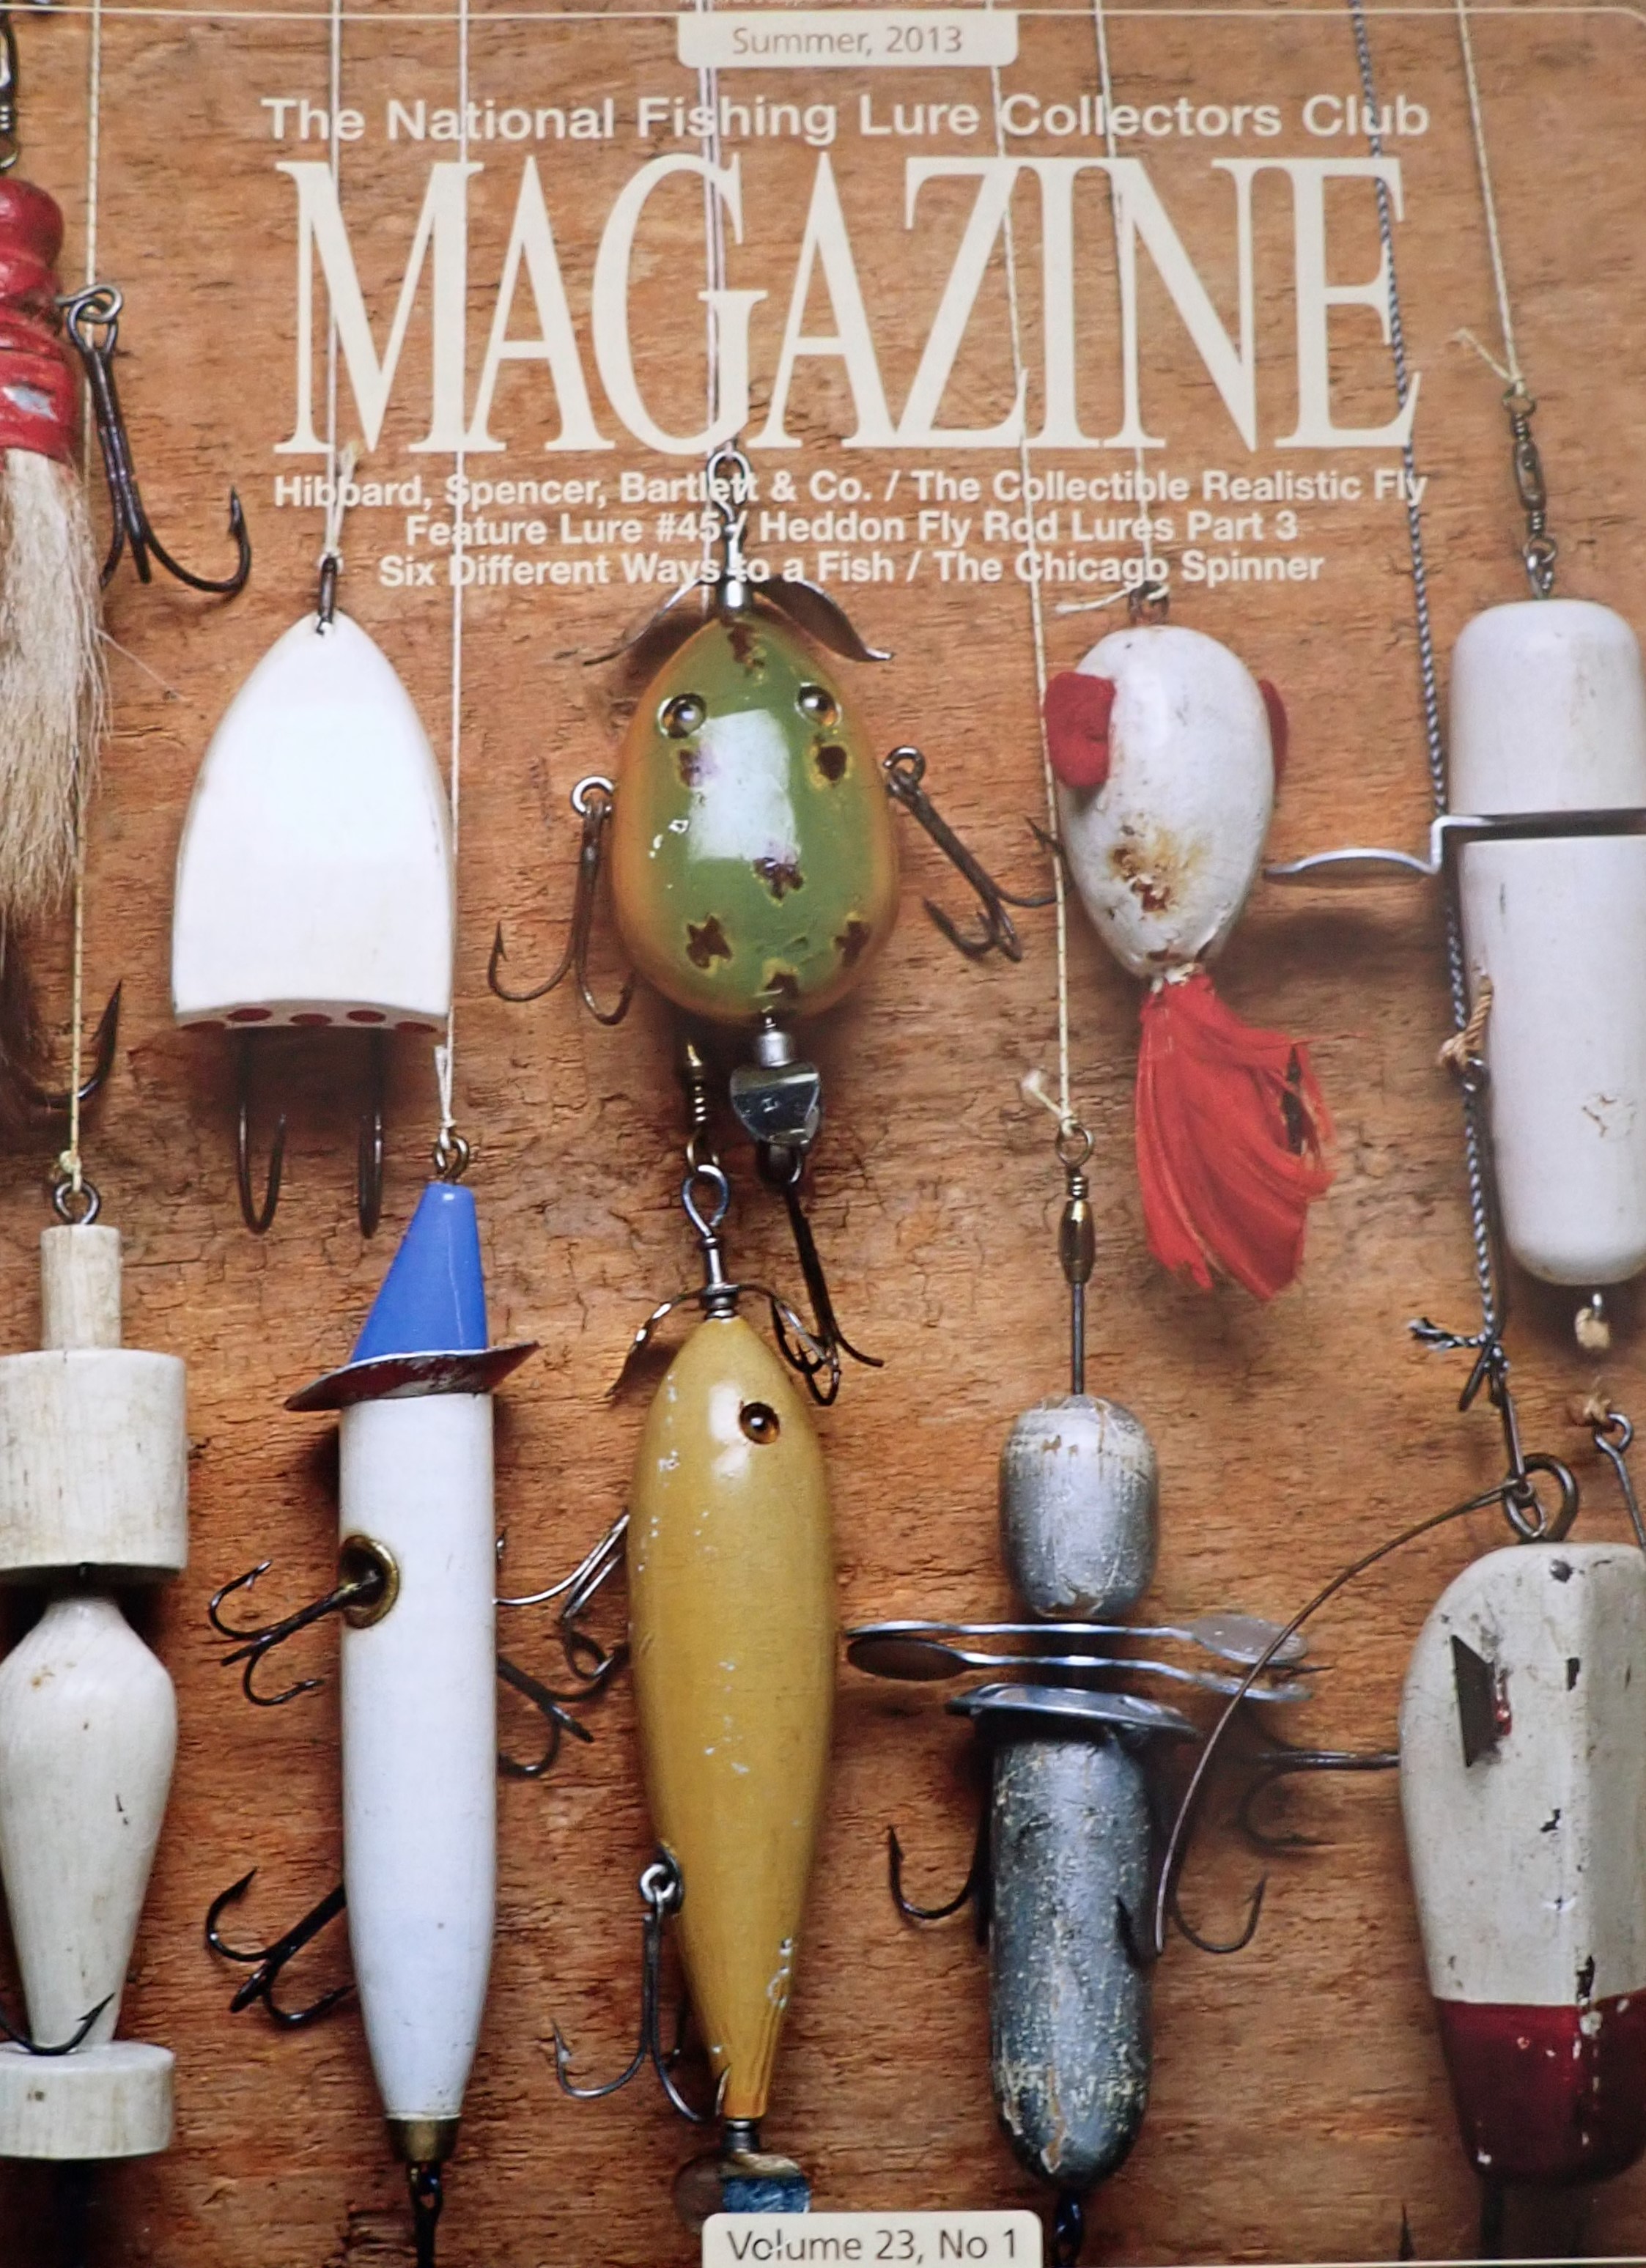 The National Fishing Lure Collectors Club Magazine (Vol. 23, No. 1